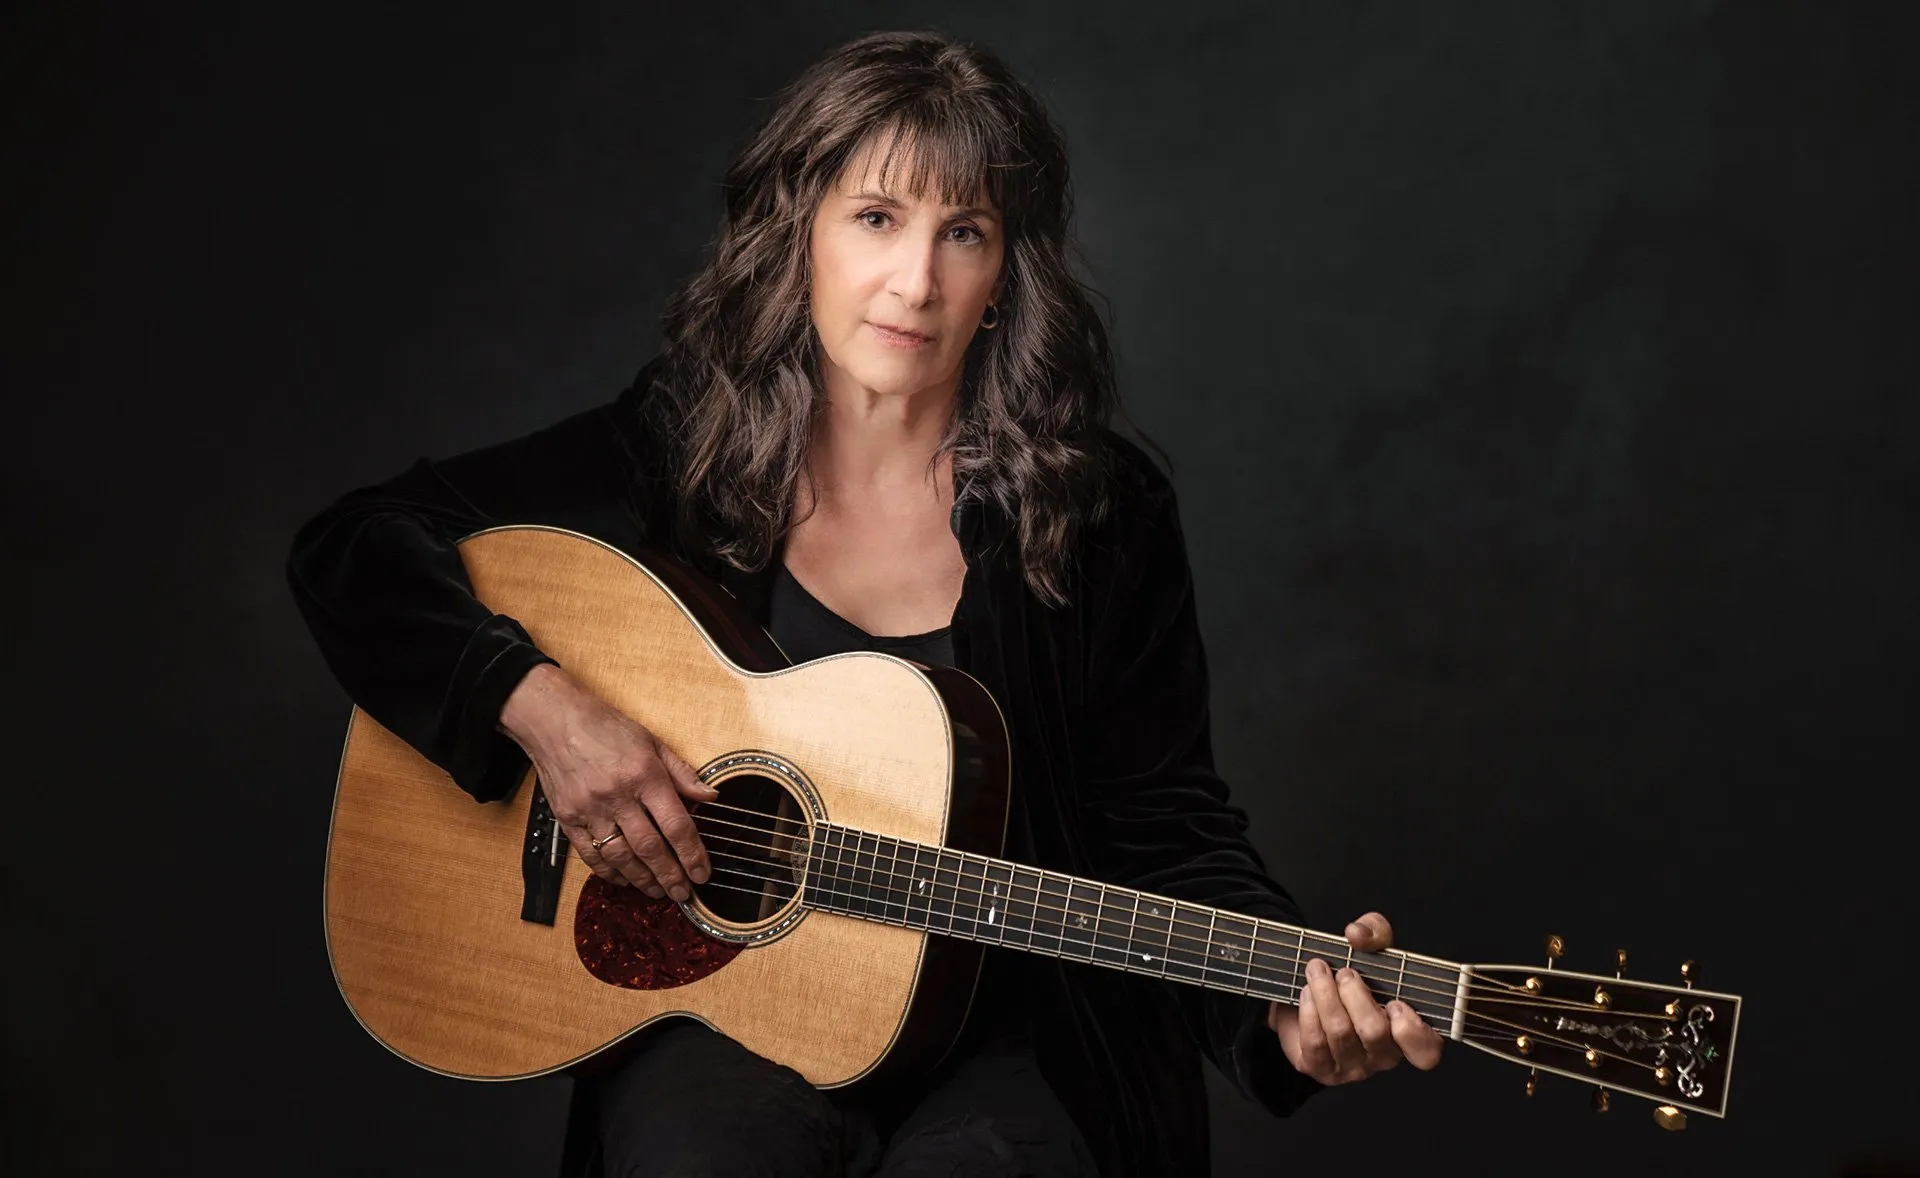 WOODBRIDGE TOWNSHIP PRESENTS KARLA BONOFF, Middlesex, New Jersey, United States